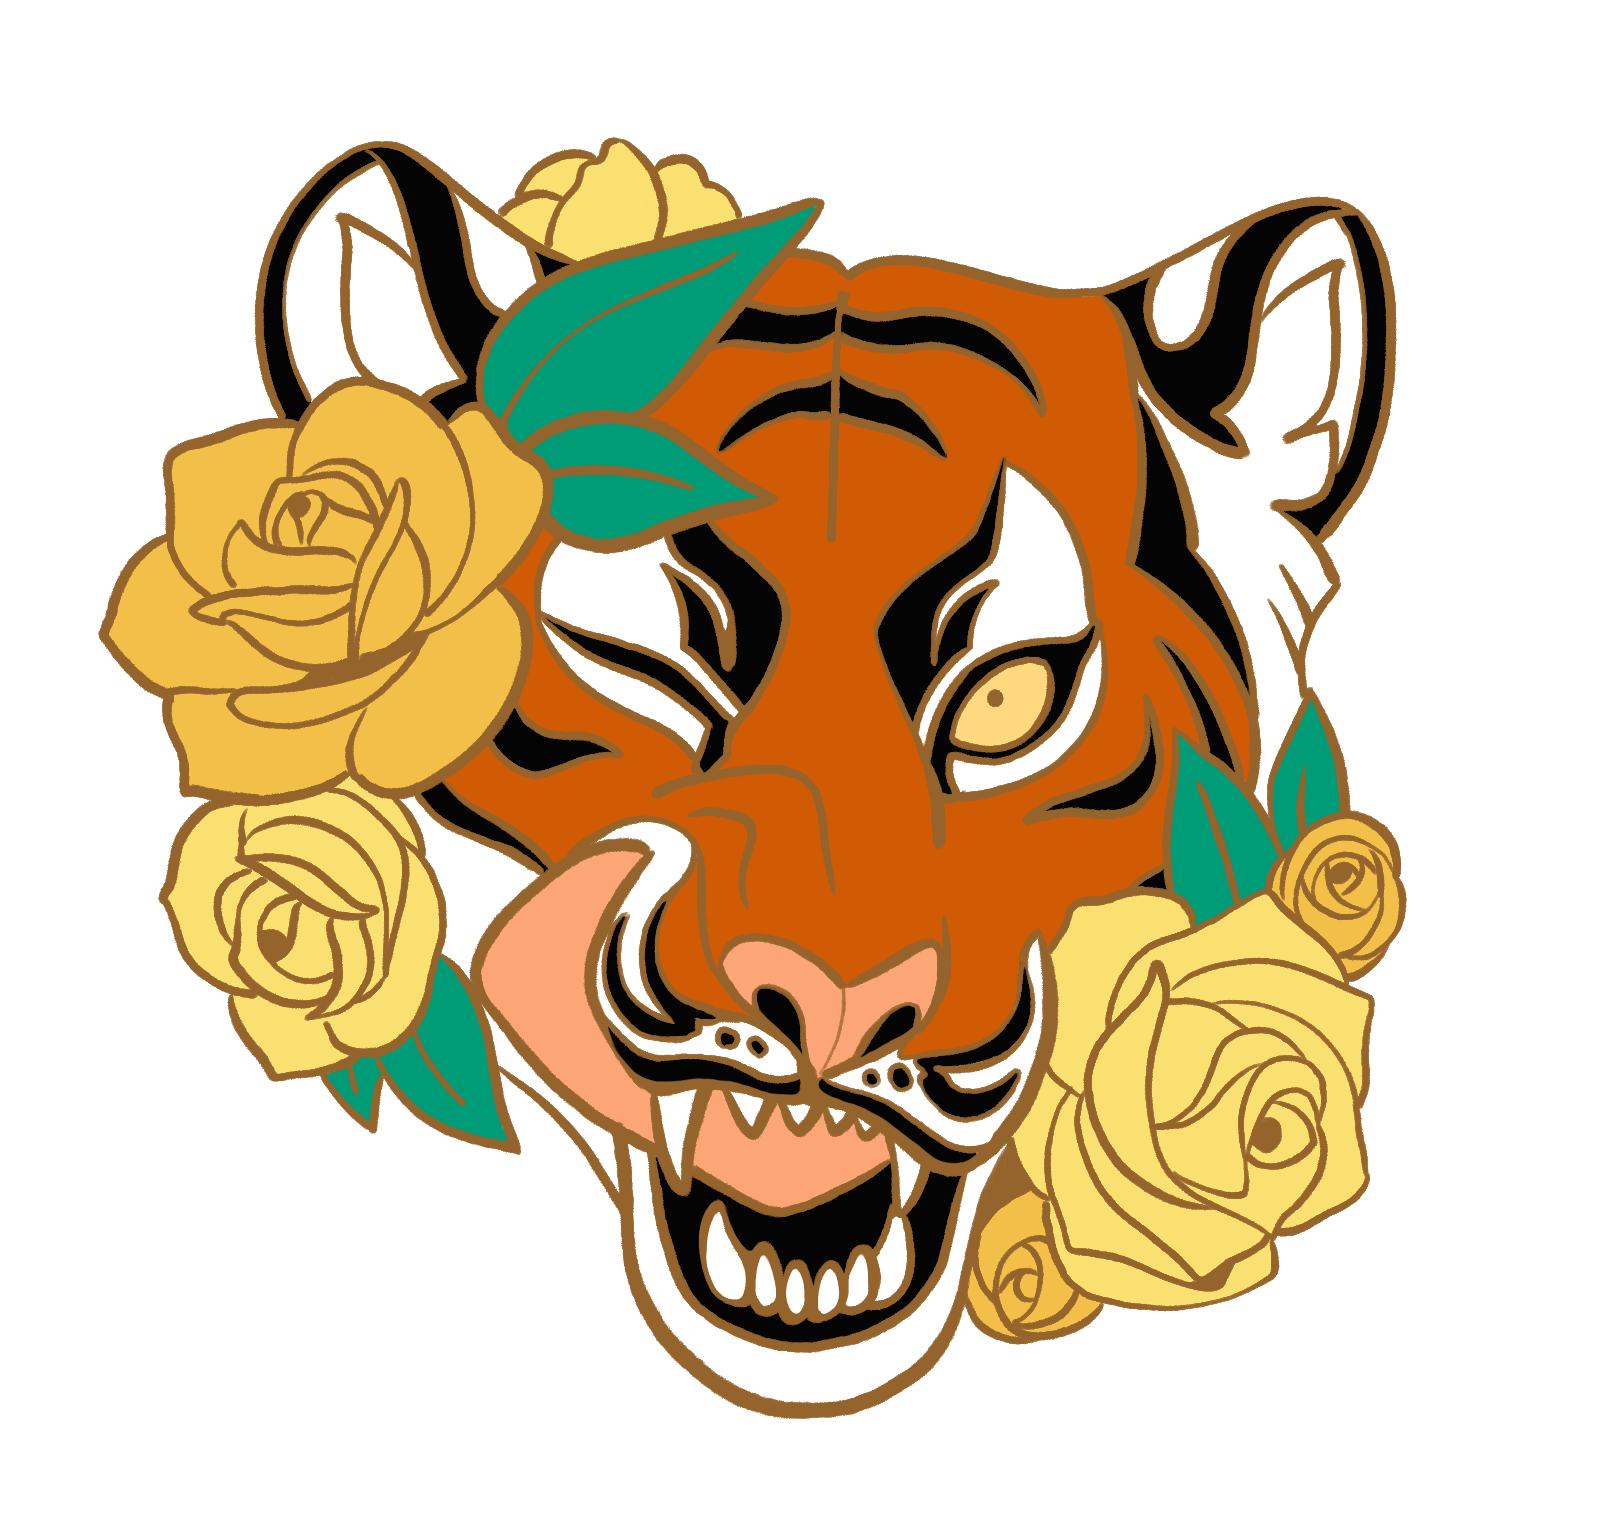 Tigress Queen - Tiger and Flowers Enamel Pin